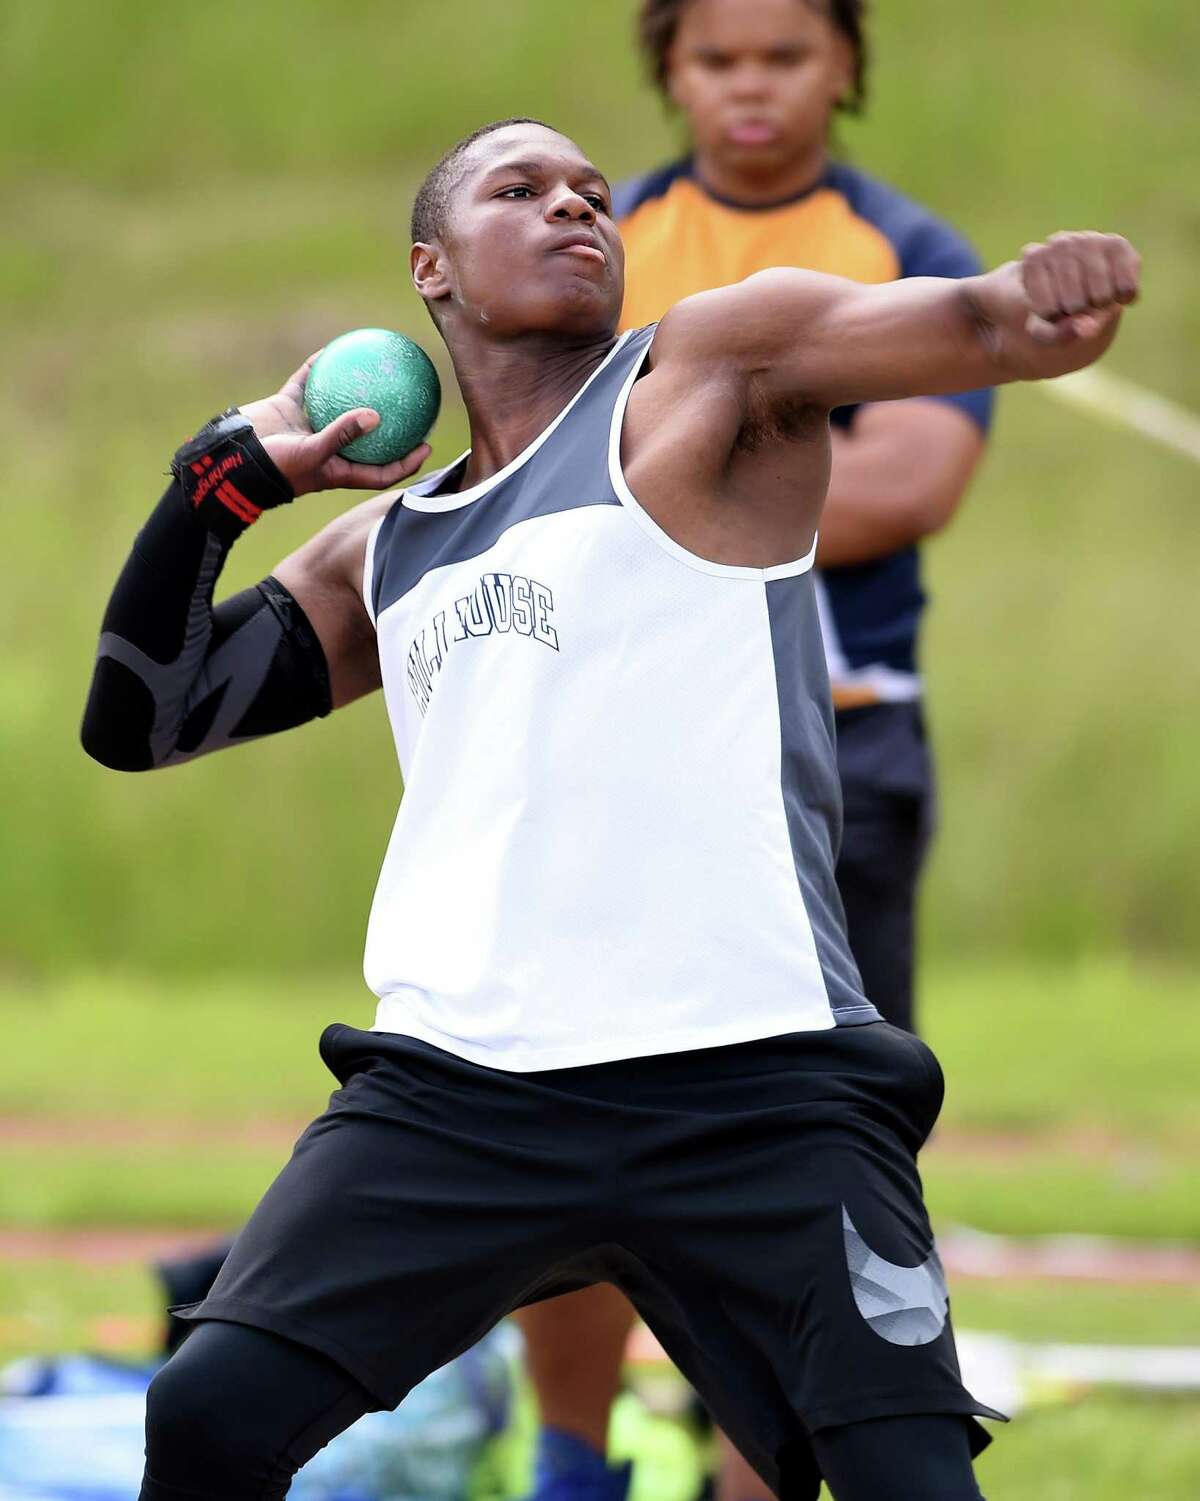 Gary Moore, Jr., of Hillhouse throws the shot put in the CIAC Class MM Outdoor Track & Field Championship at Middletown High School on May 29, 2019.